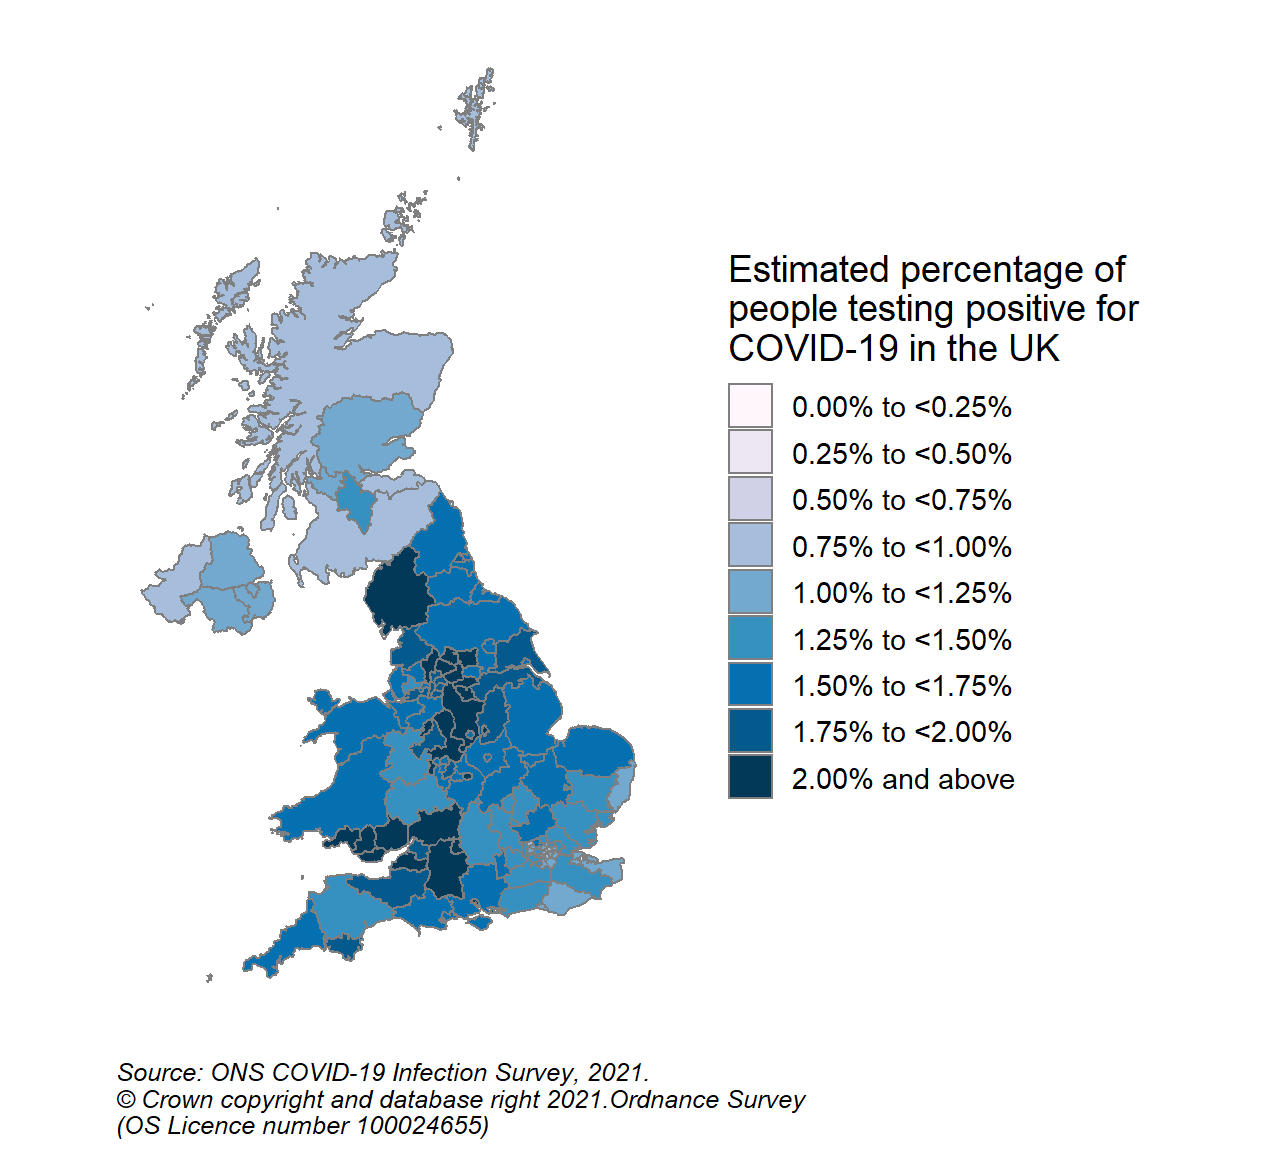 This colour coded map of the UK shows the modelled estimates of the percentage of the private residential population testing positive for COVID-19, by COVID-19 Infection Survey sub-regions. In Scotland, these sub-regions are comprised of Health Boards. The regions are: 123 - NHS Grampian, NHS Highland, NHS Orkney, NHS Shetland and NHS Western Isles, 124 - NHS Fife, NHS Forth Valley and NHS Tayside, 125 - NHS Greater Glasgow & Clyde, 126 - NHS Lothian, 127 - NHS Lanarkshire, 128 - NHS Ayrshire & Arran, NHS Borders and NHS Dumfries & Galloway.  The sub-region with the highest modelled estimate for the percentage of people testing positive was CIS Region 124 (NHS Fife, NHS Forth Valley and NHS Tayside) at 1.24% (95% credible interval: 1.03% to 1.51%).  The sub-region with the lowest modelled estimate was Region 128 (NHS Ayrshire & Arran, NHS Borders and NHS Dumfries & Galloway), at 0.92% (95% credible interval: 0.71% to 1.17%).